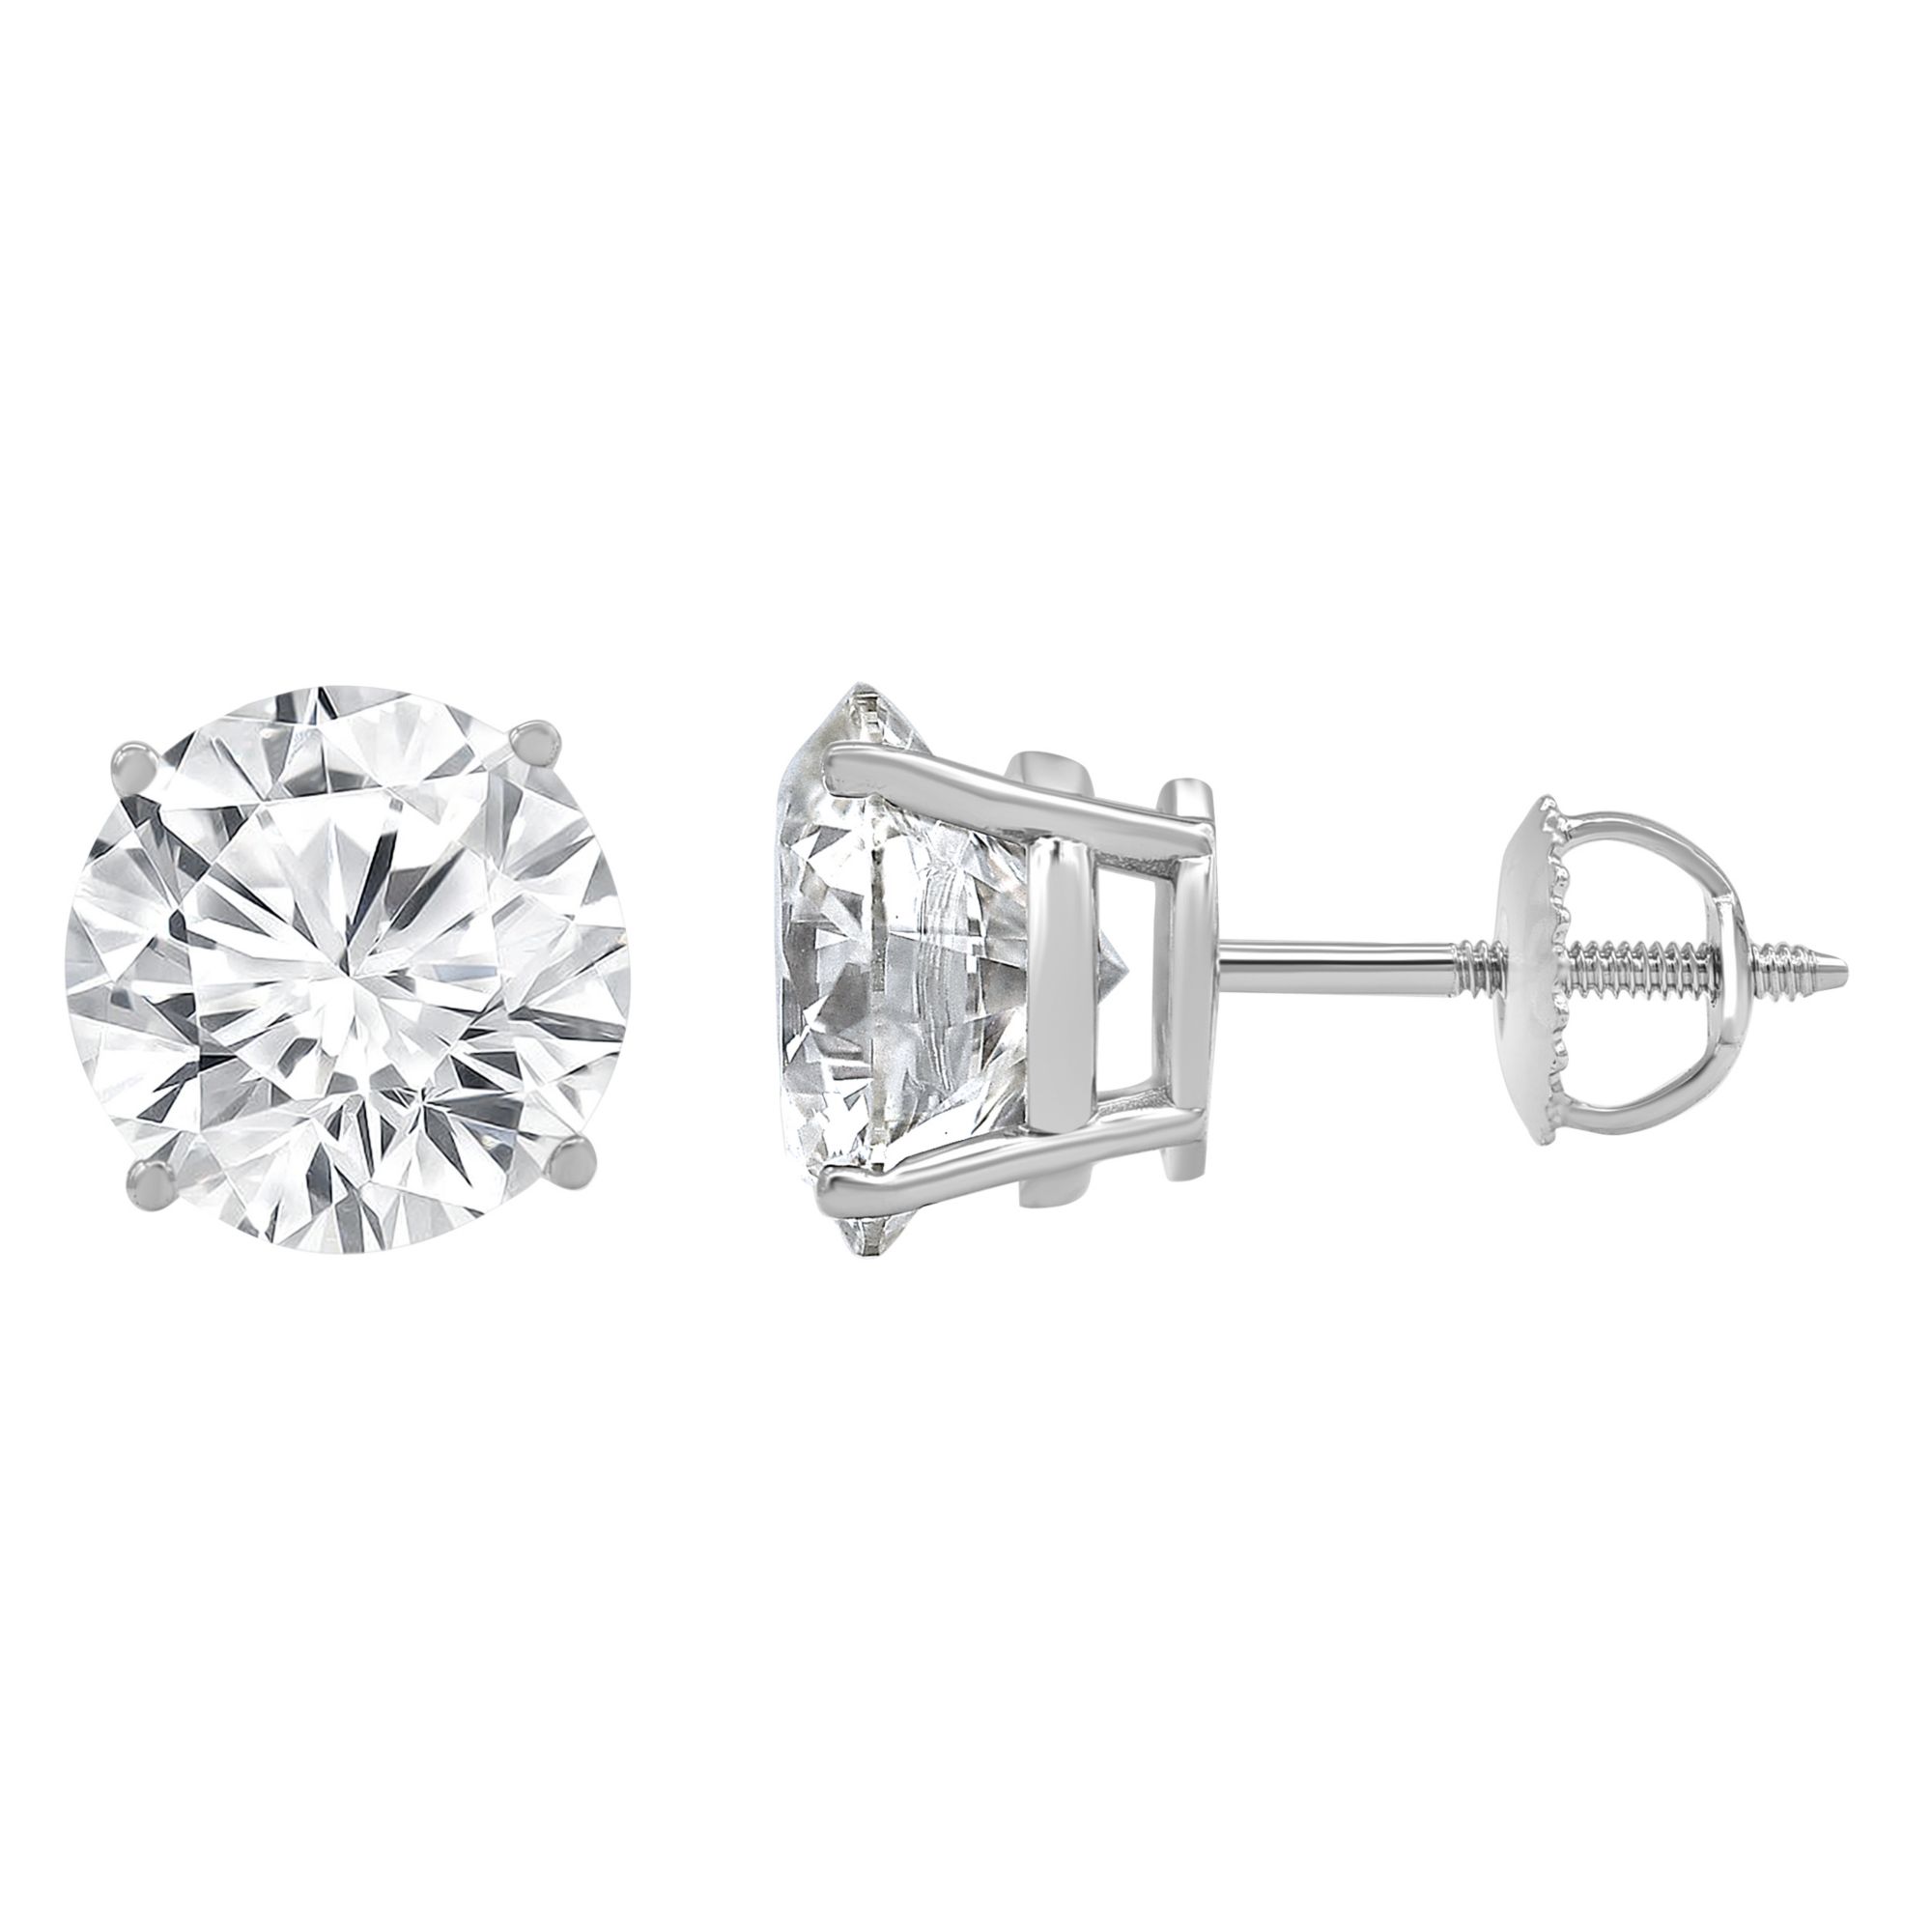 Pocket-Friendly Wholesale baby diamond stud earrings For All Occasions 